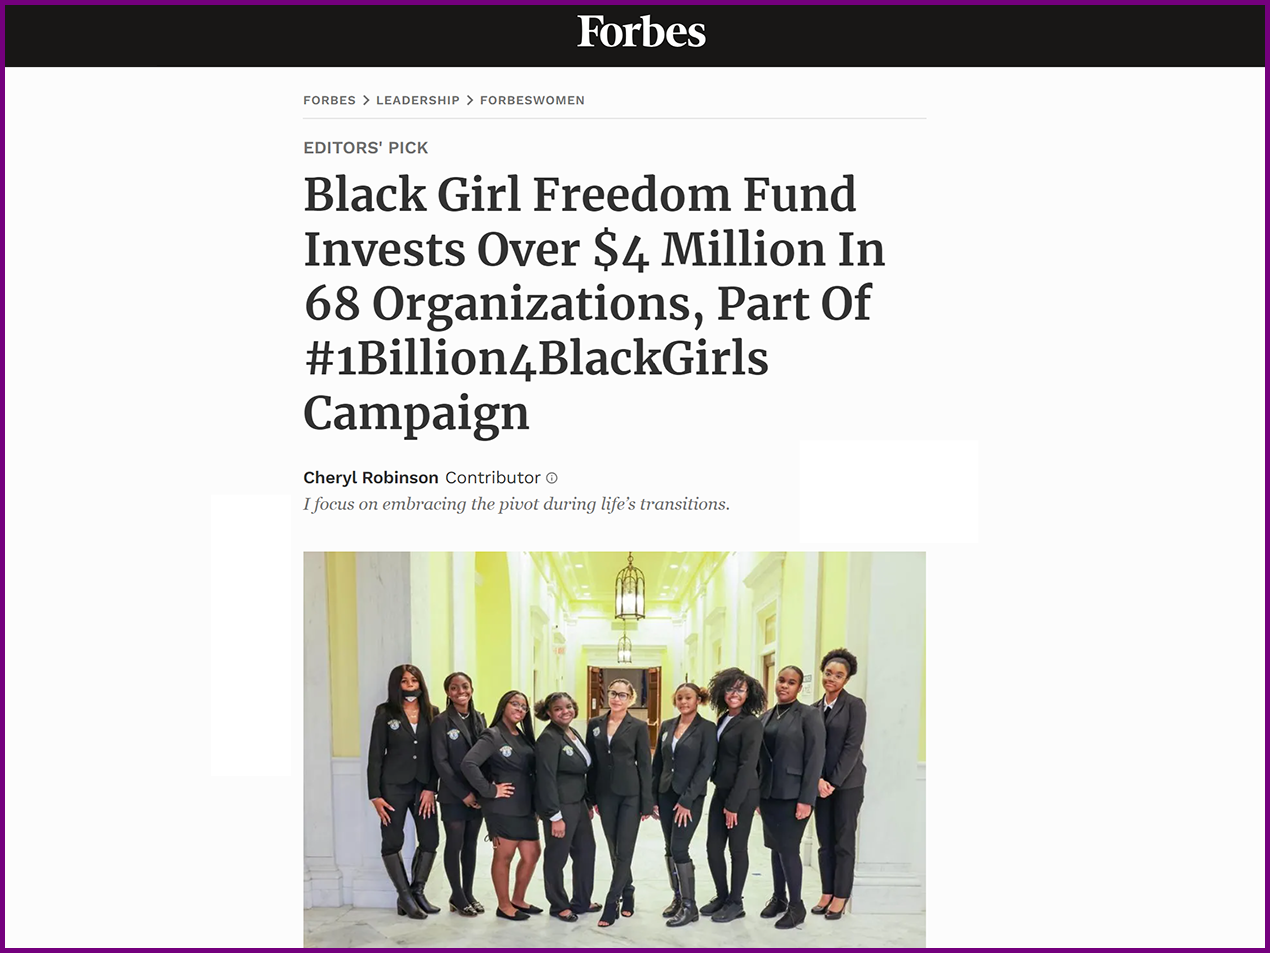 Forbes feature: “Black Girl Freedom Fund Invests Over $4 Million In 68 Organizations, Part Of #1Billion4BlackGirls Campaign”